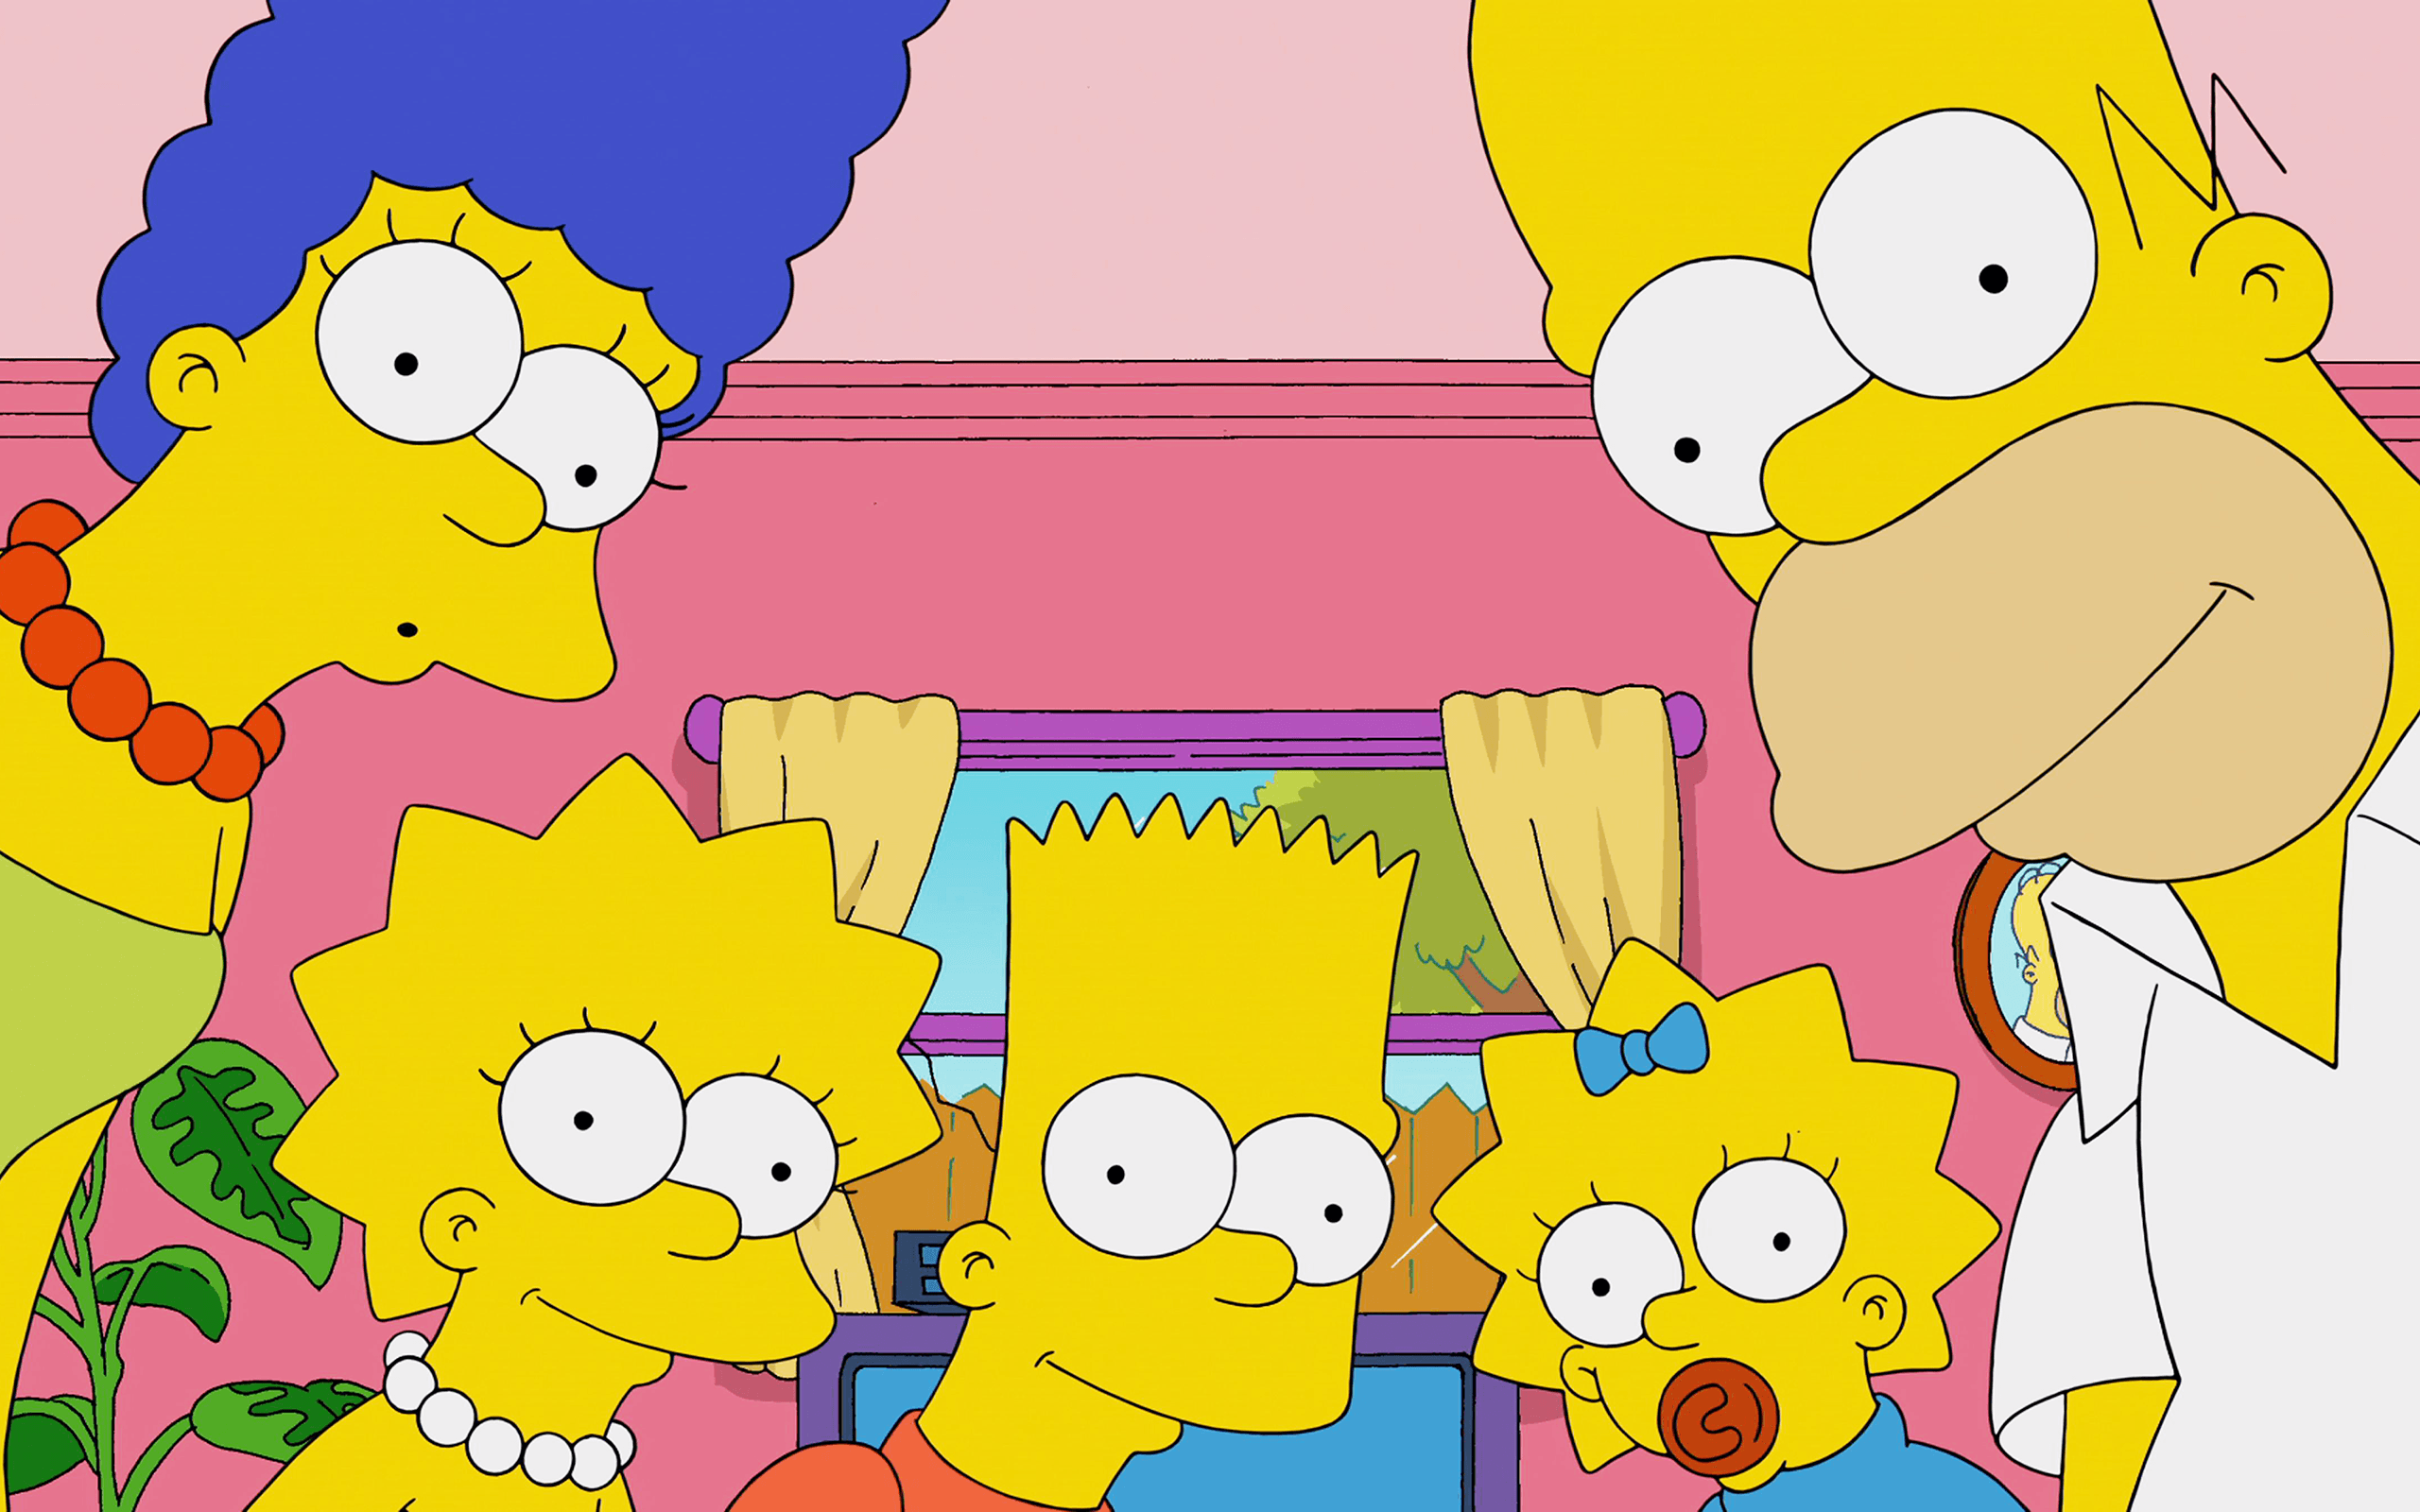 The Simpsons Couch, Family, and Springfield Town Background Image Background Image